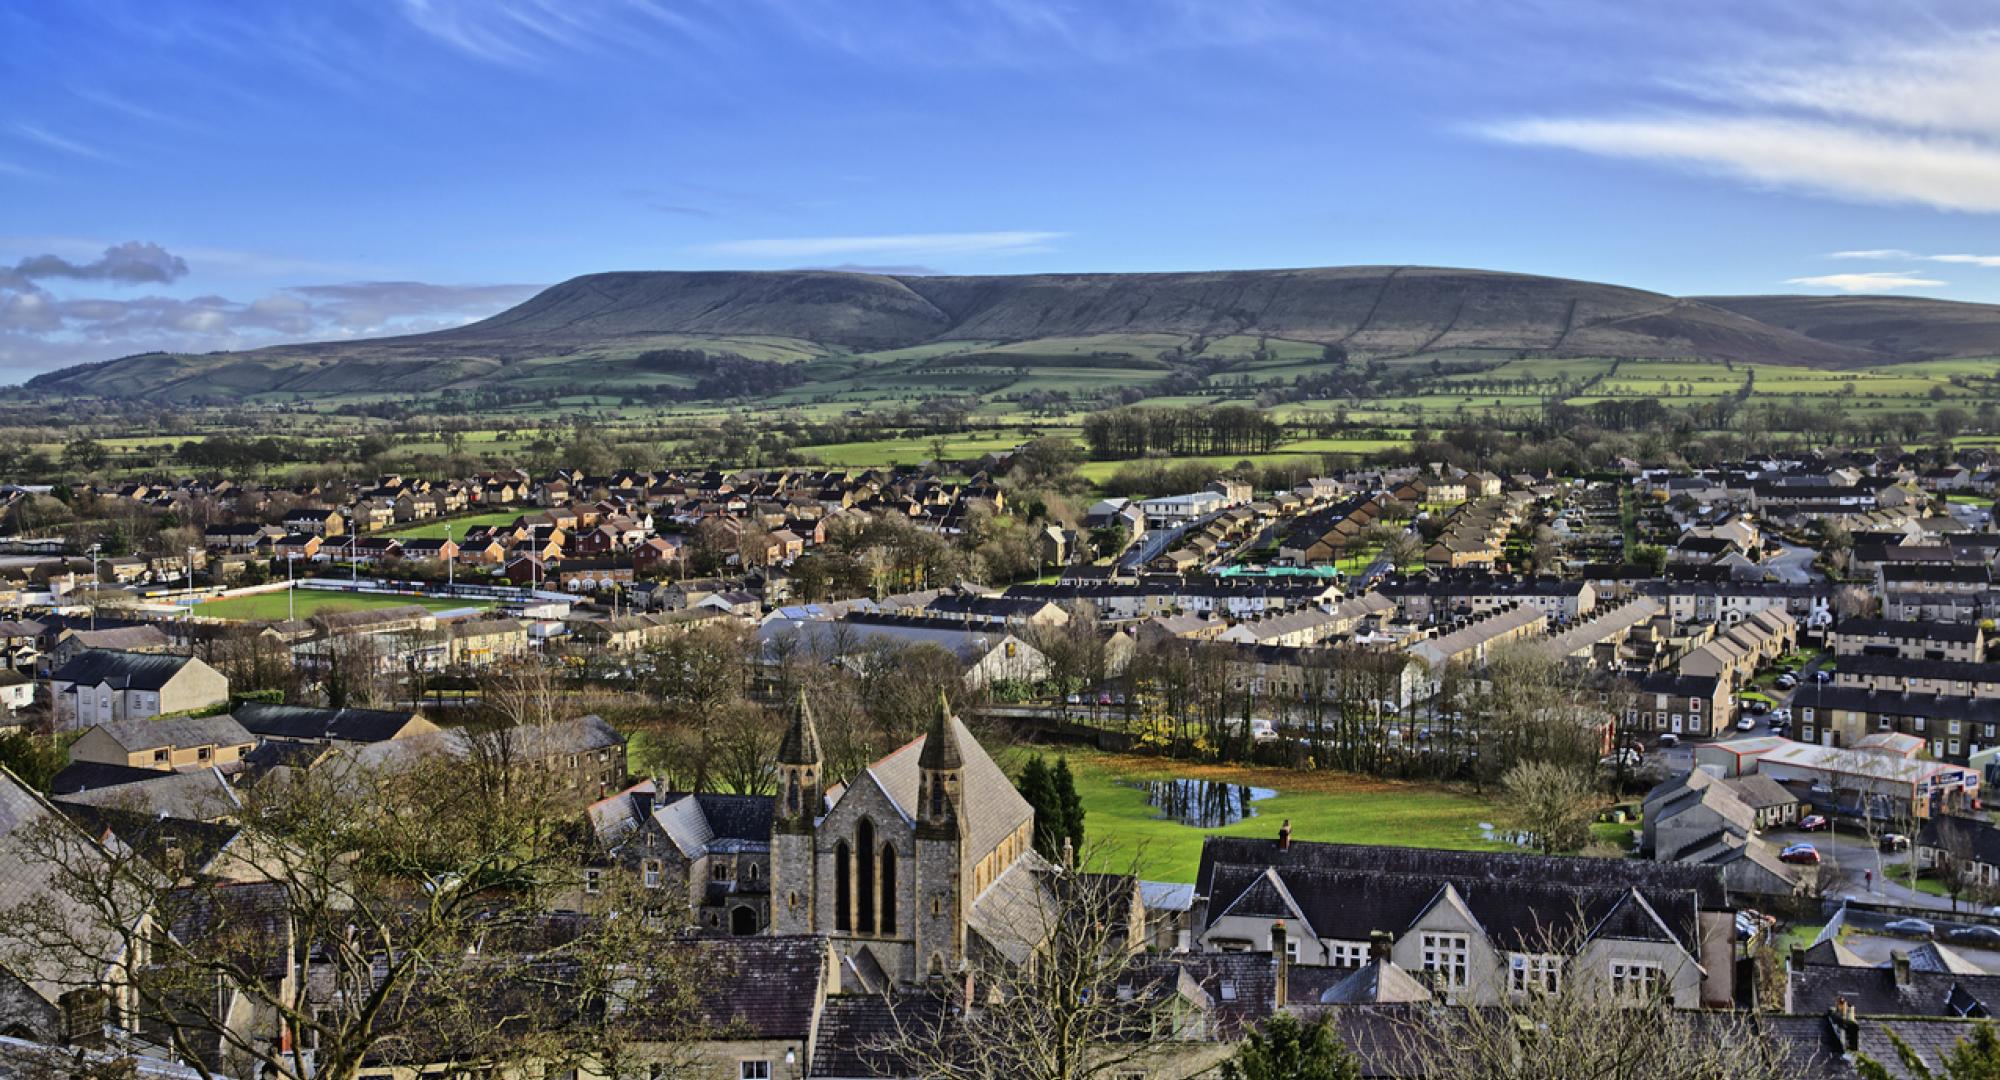 View of Pendle Hill from Clitheroe